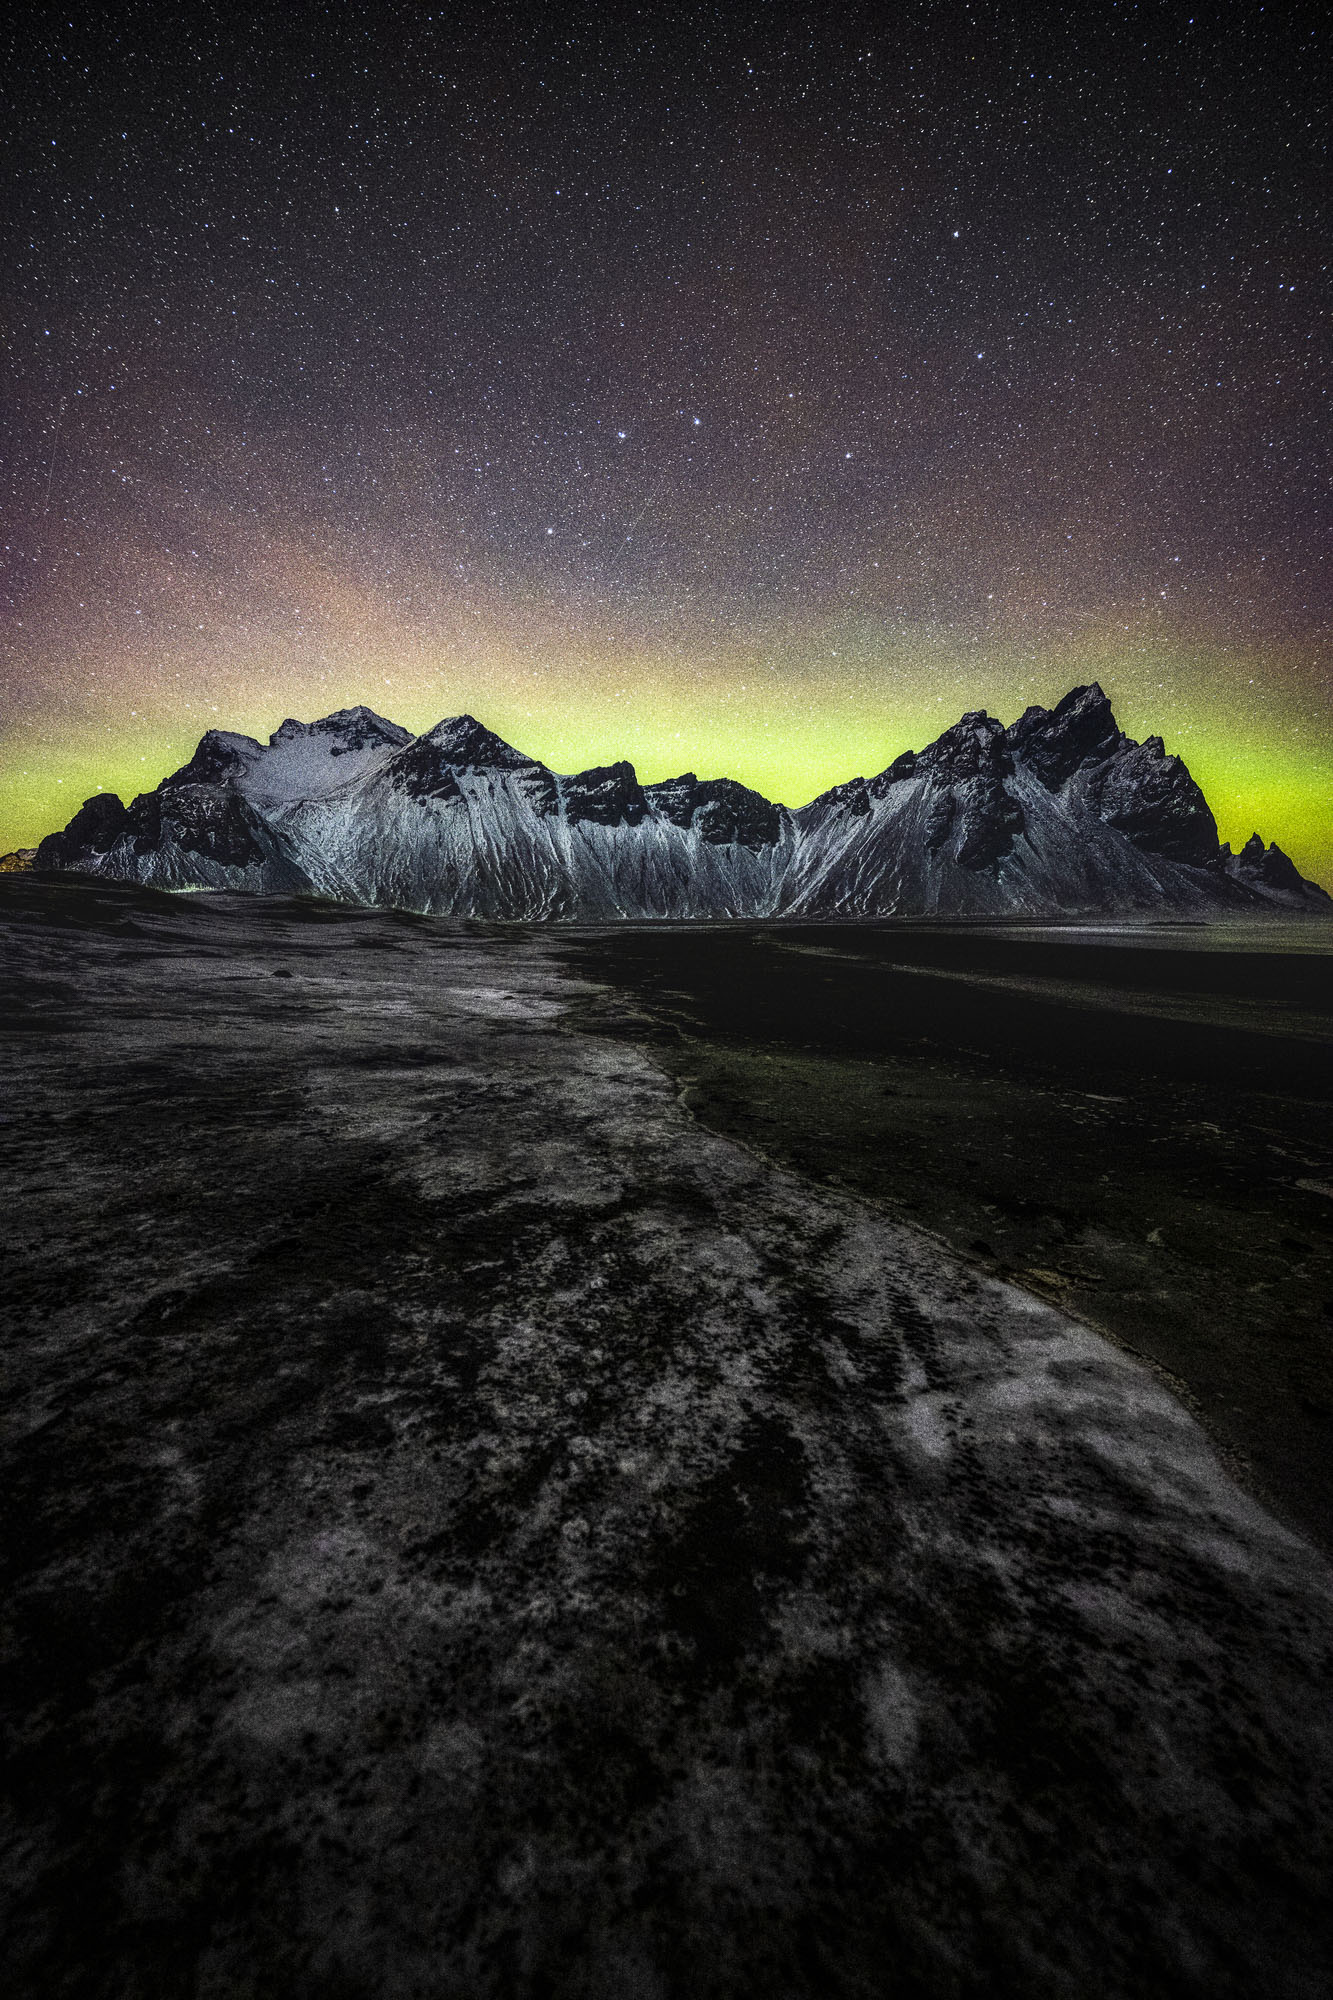 Northern Lights radiate behind snowy mountains in the night sky near Stokksnes in Southern Iceland.